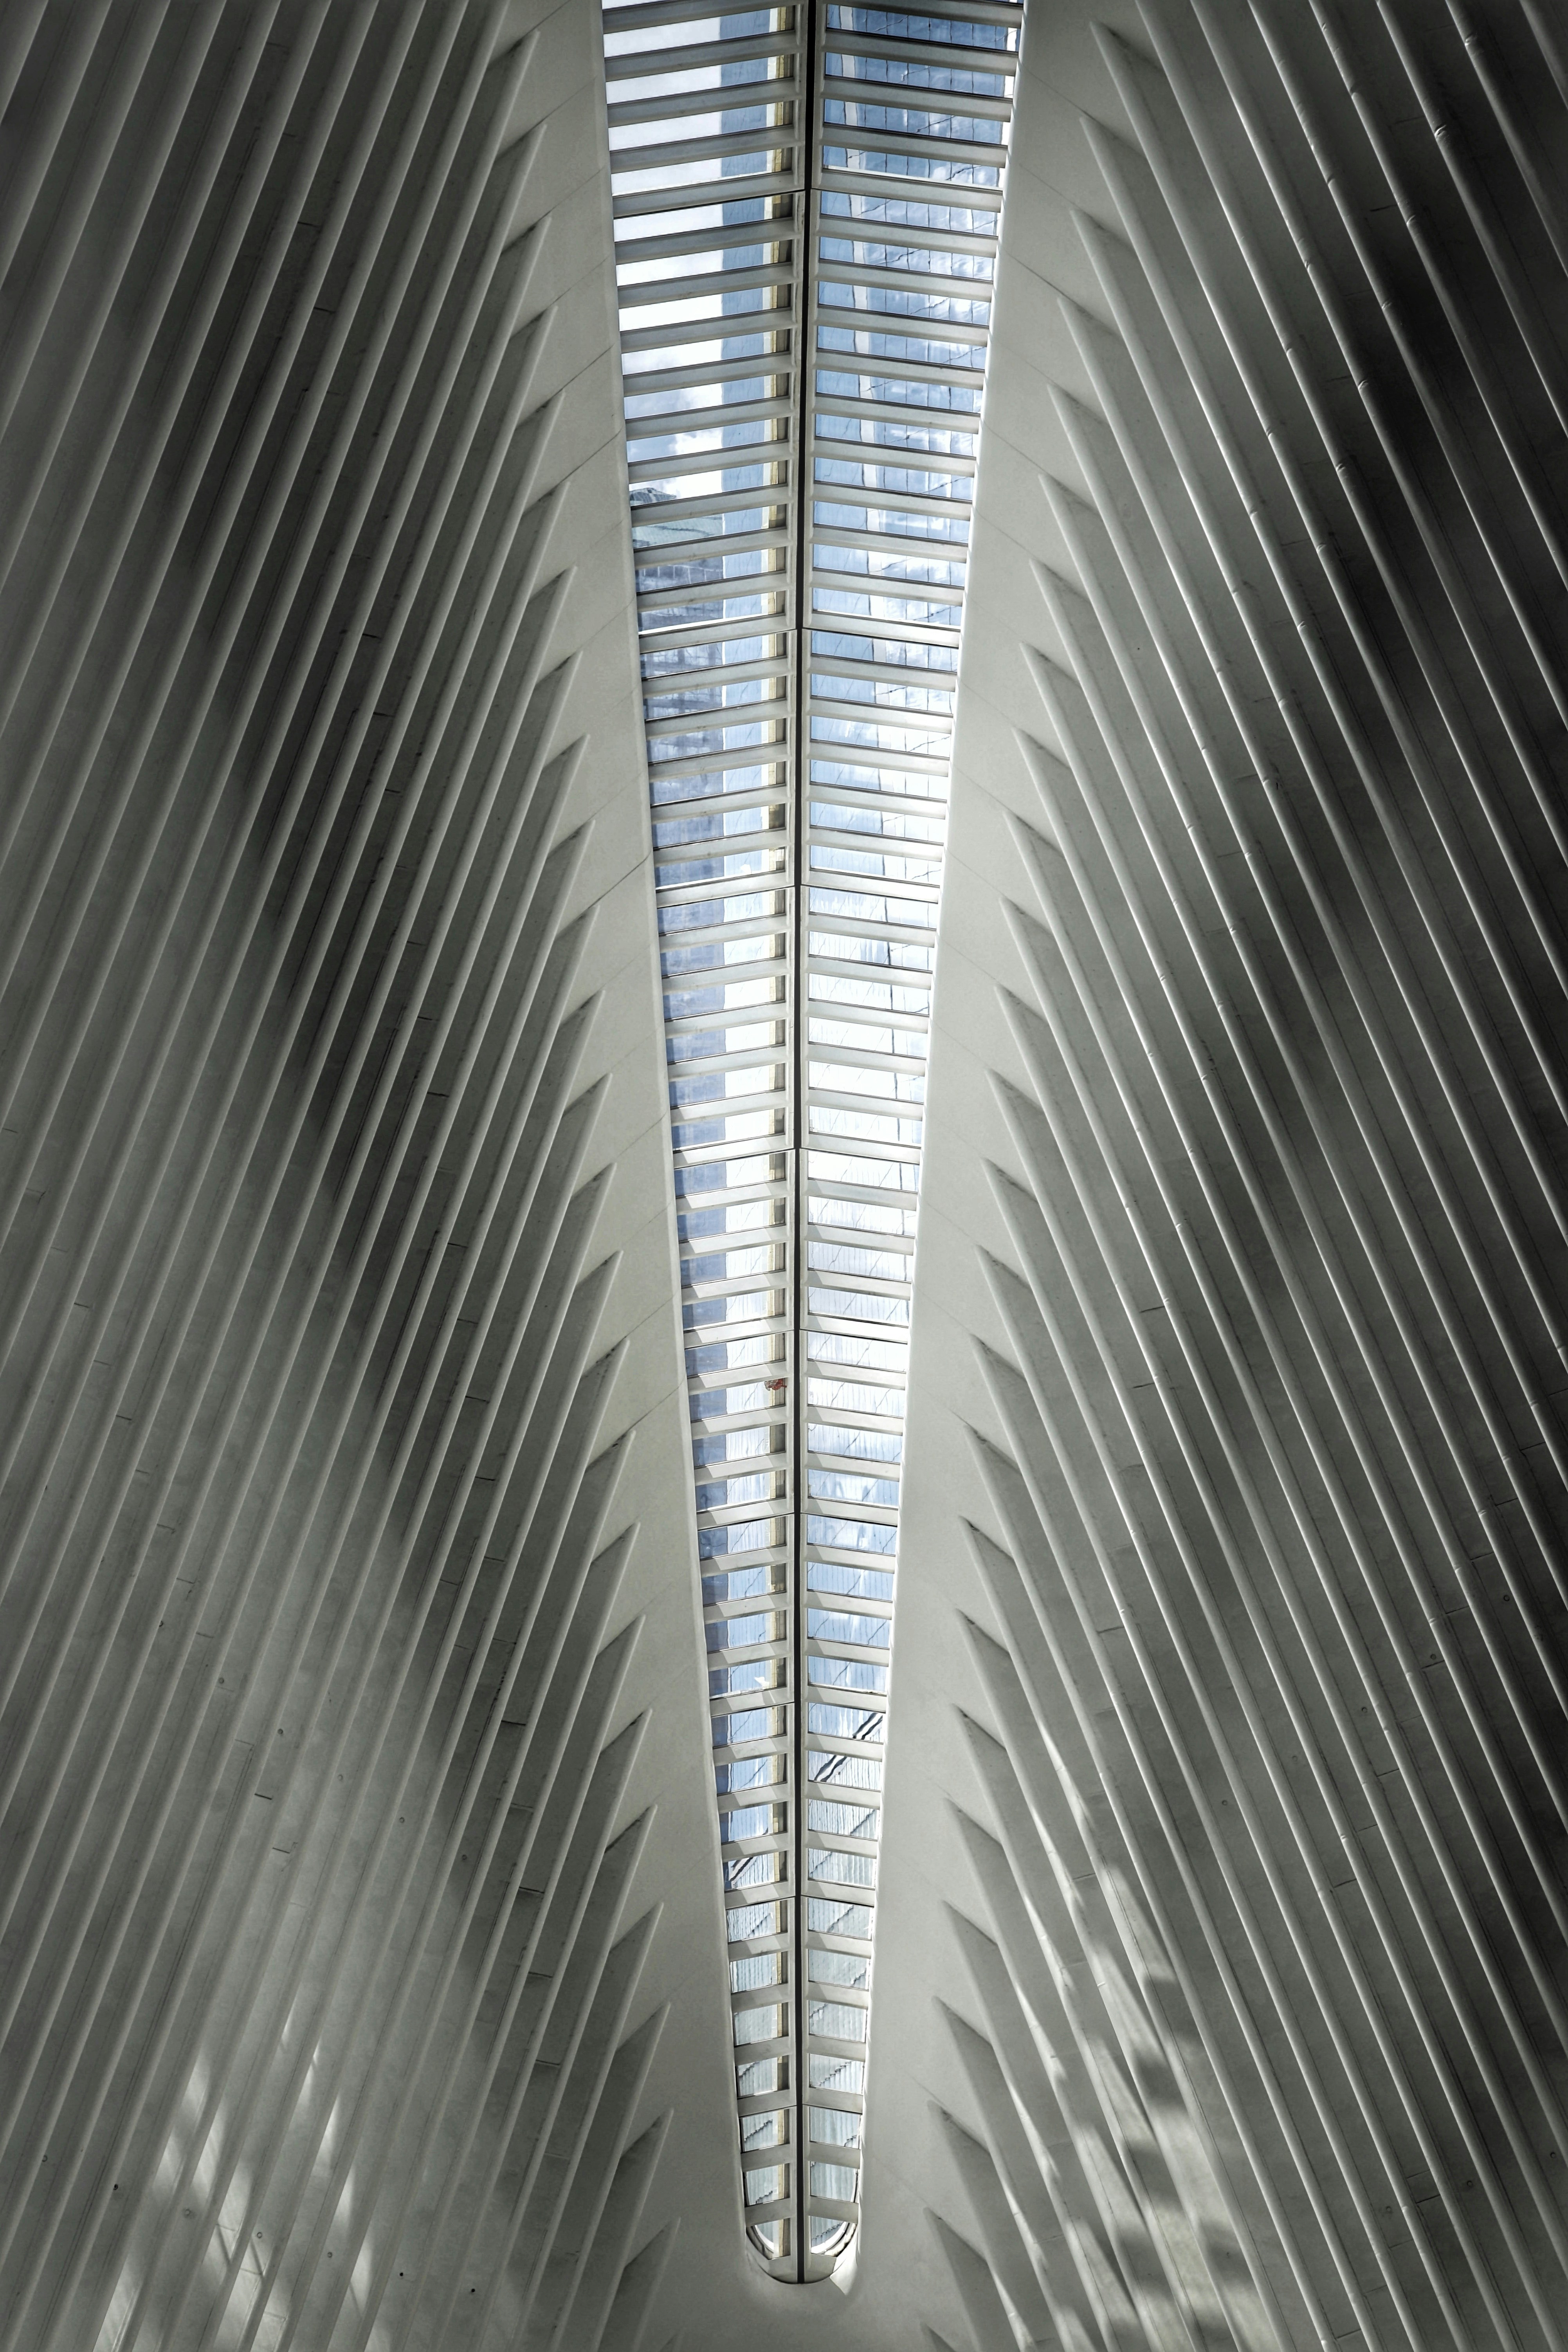 View to the roof of the oculus mall in New York City